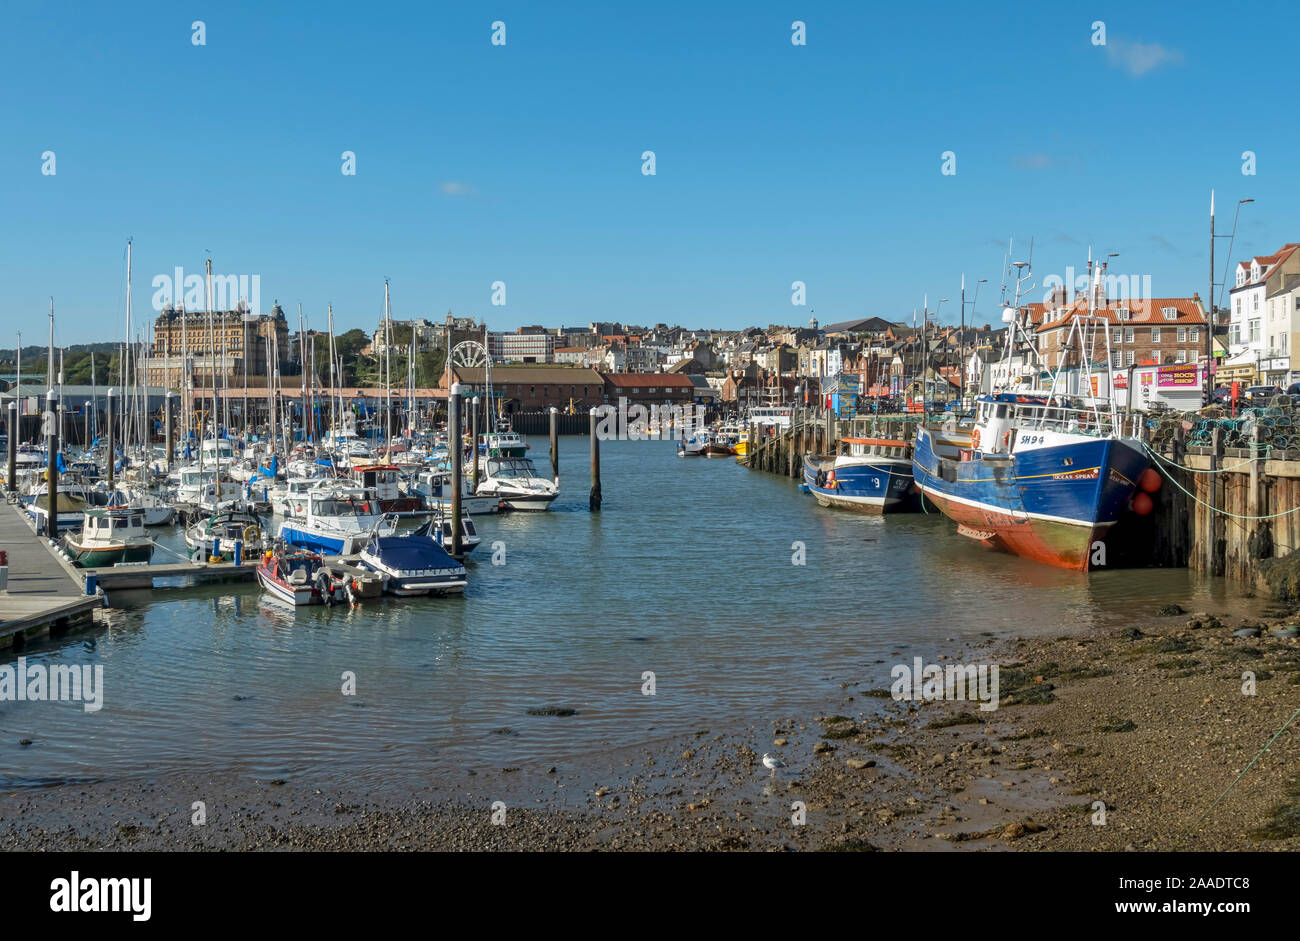 Fishing boat boats in the harbour at low tide in winter Scarborough North Yorkshire England UK United Kingdom GB Great Britain Stock Photo